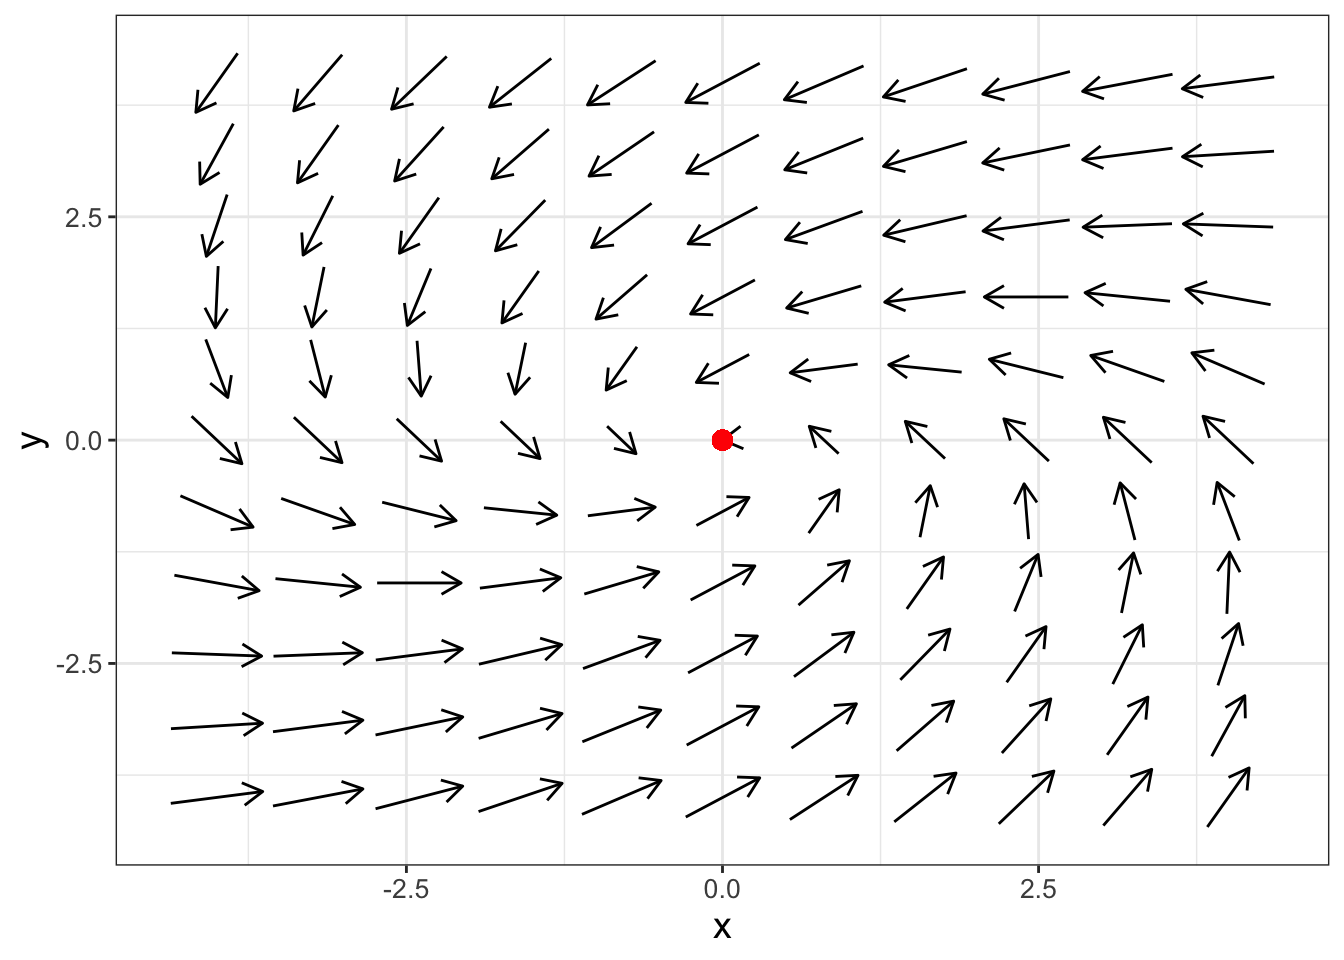 Phase plane for Equation \@ref(eq:spiral-sink-ex-18), which shows the equilibrium solution is a spiral sink.